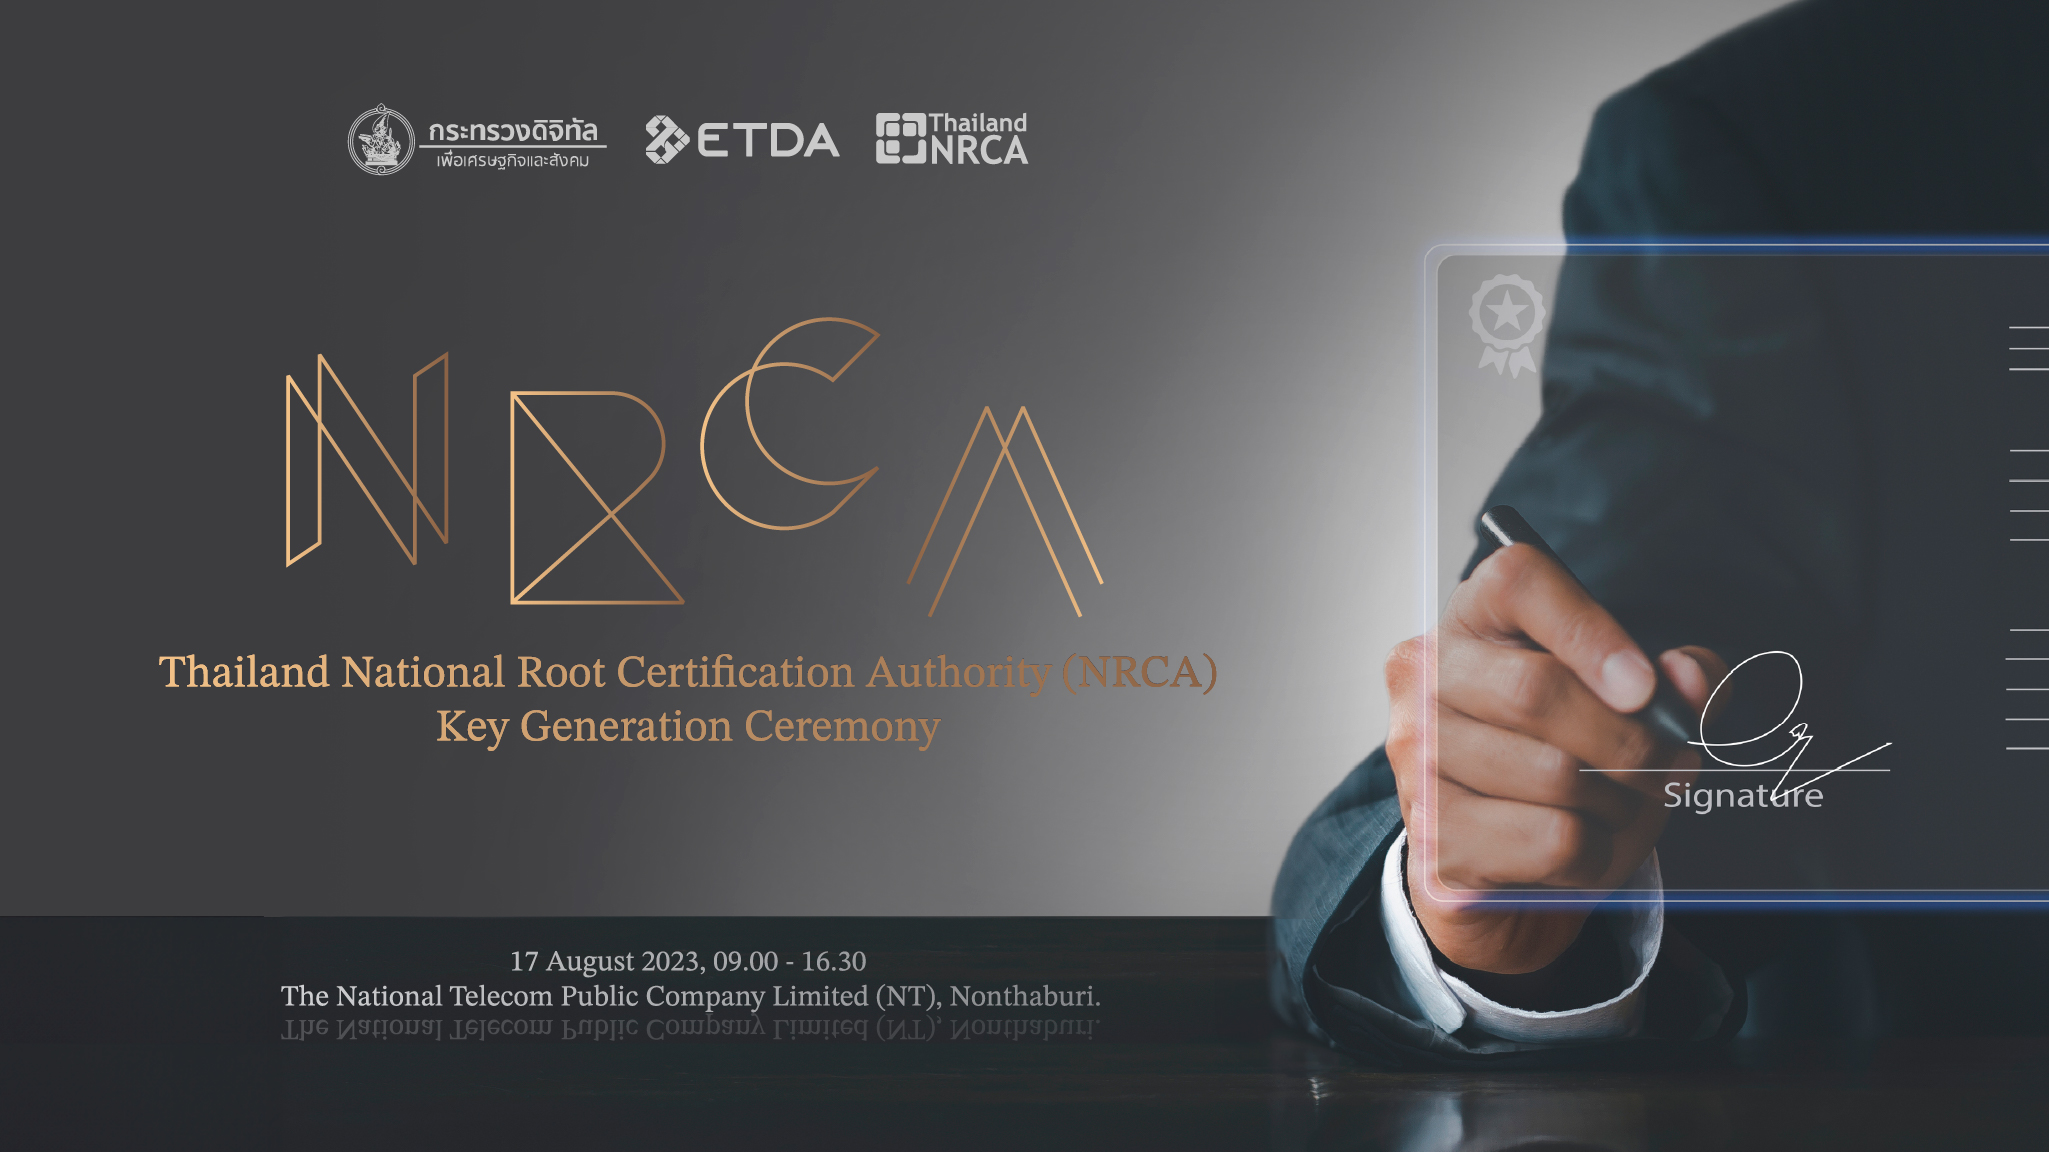 Thailand NRCA Key Generation Ceremony set the goal to accommodate up to 1M certificates by 2025.